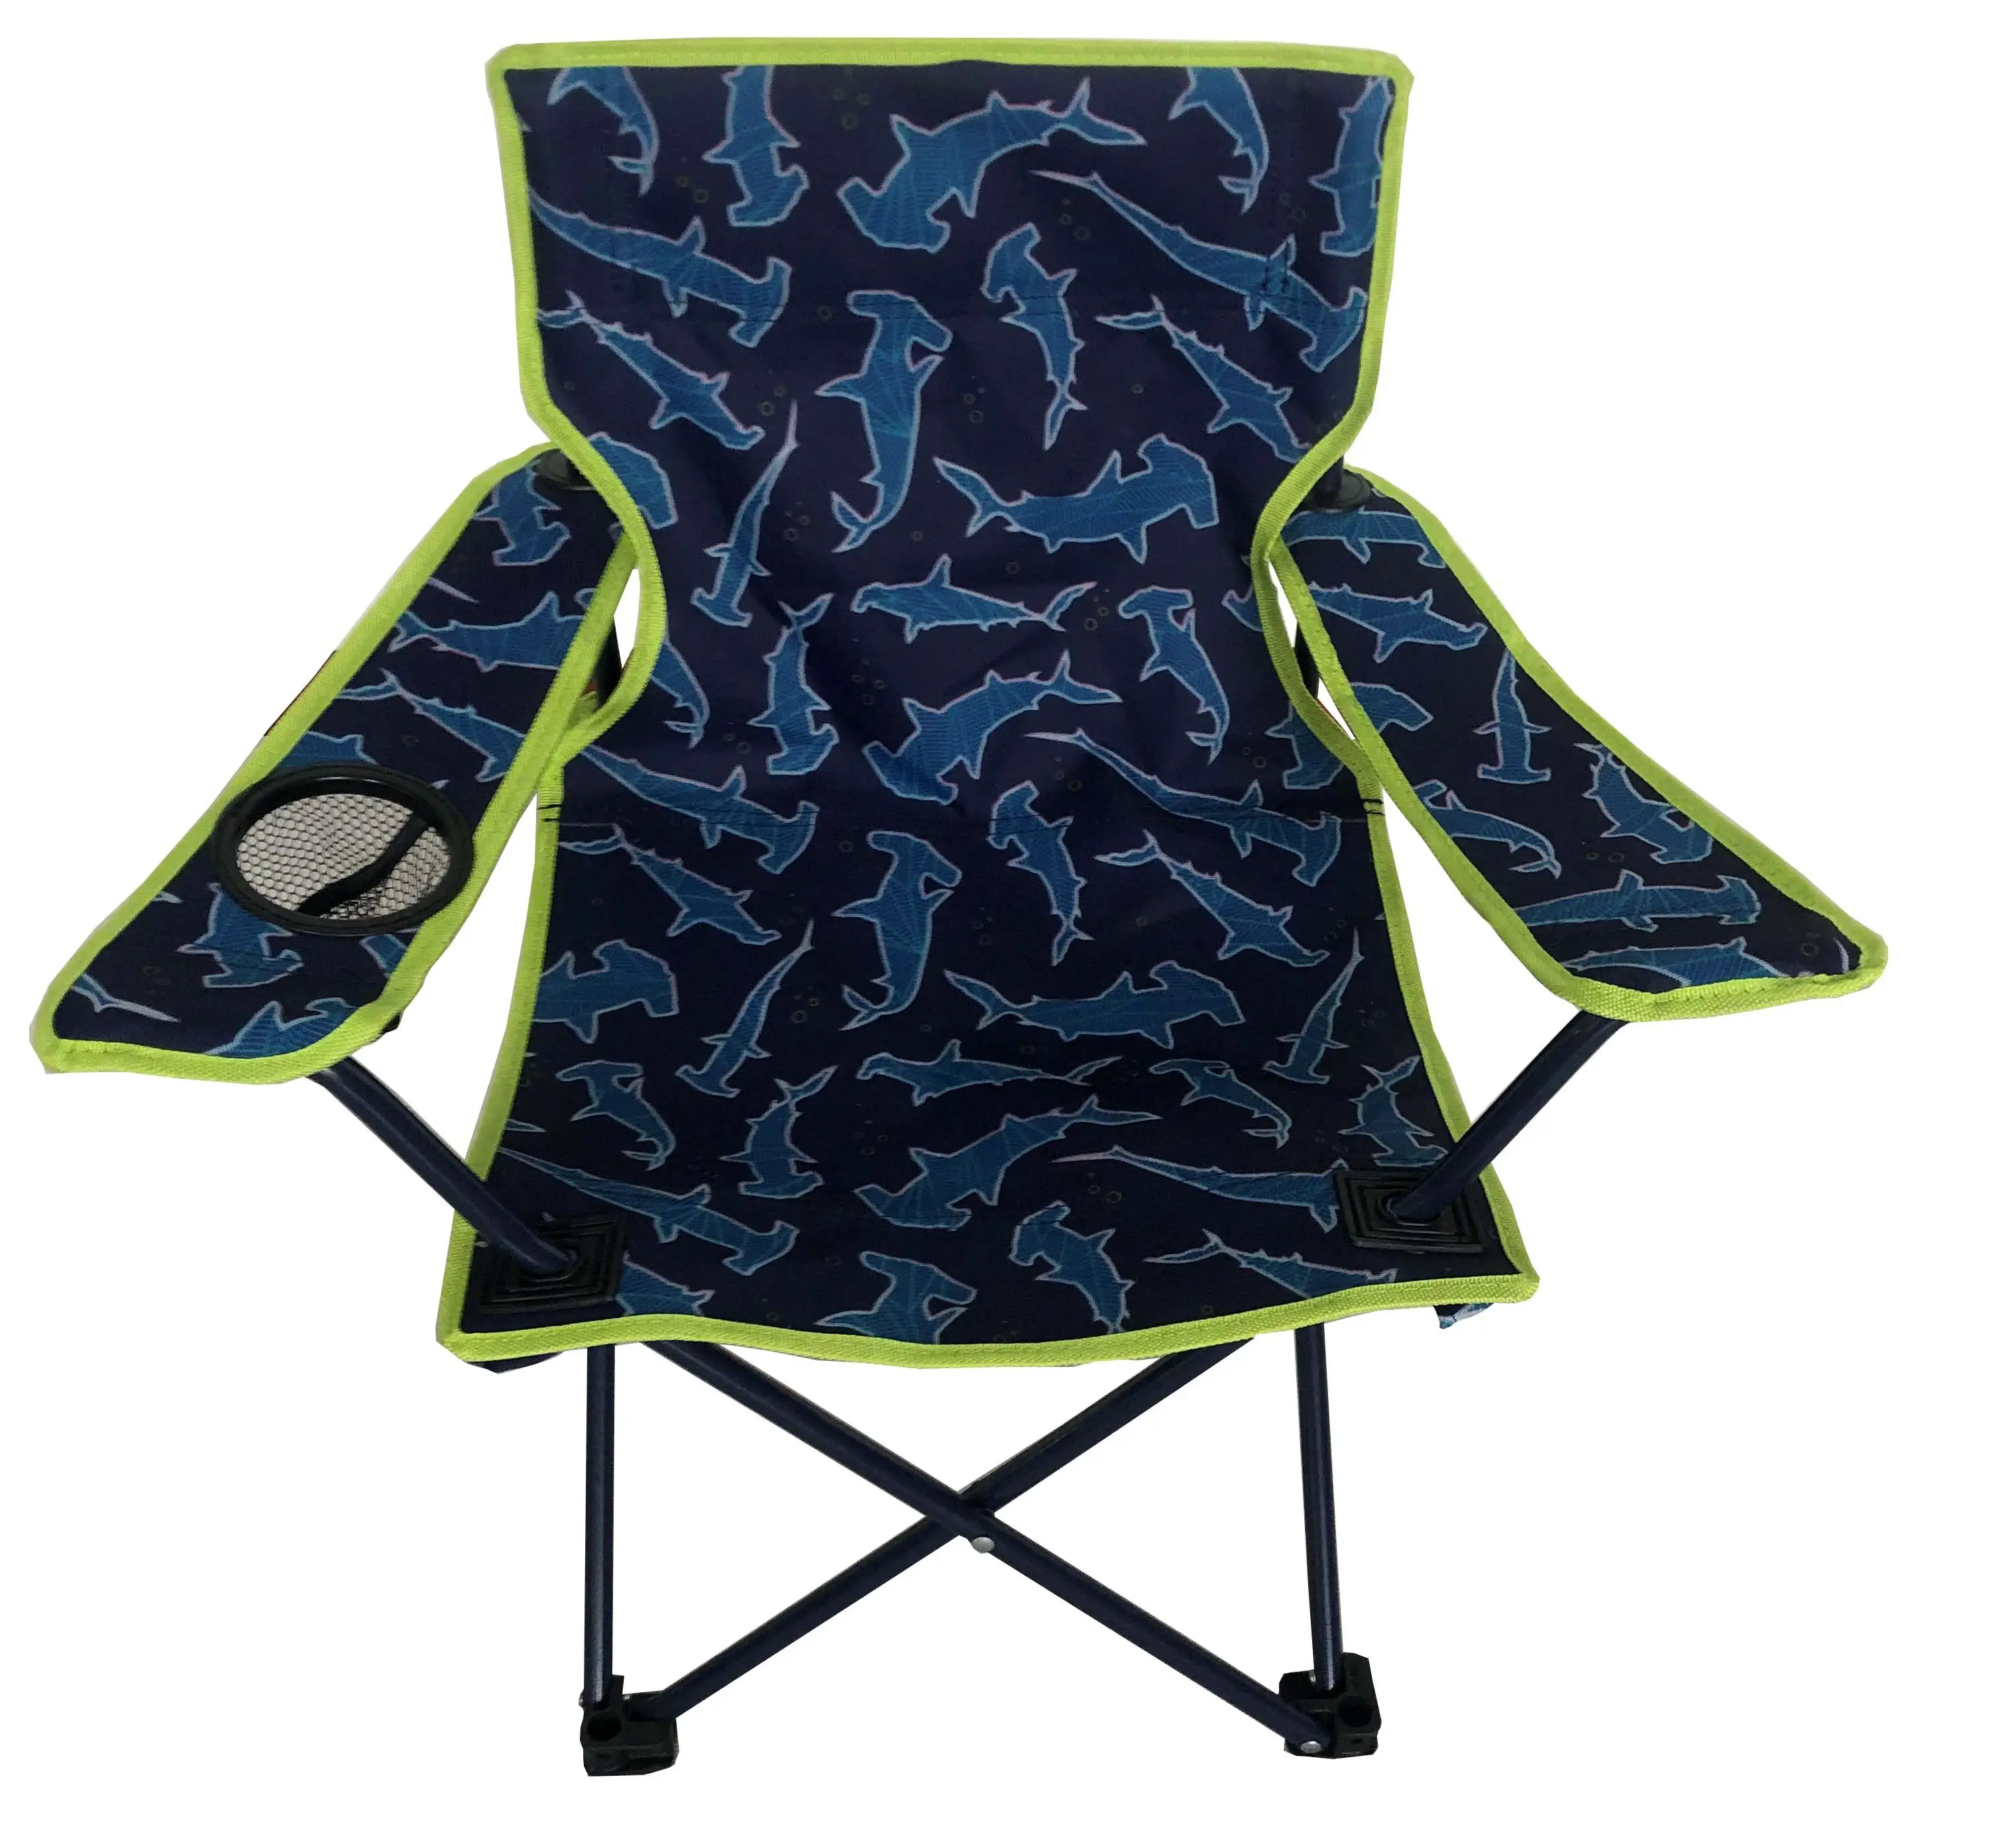 compact portable safety fancy cartoon design shark and unicorn paint padded folding camping kids chair with armrest